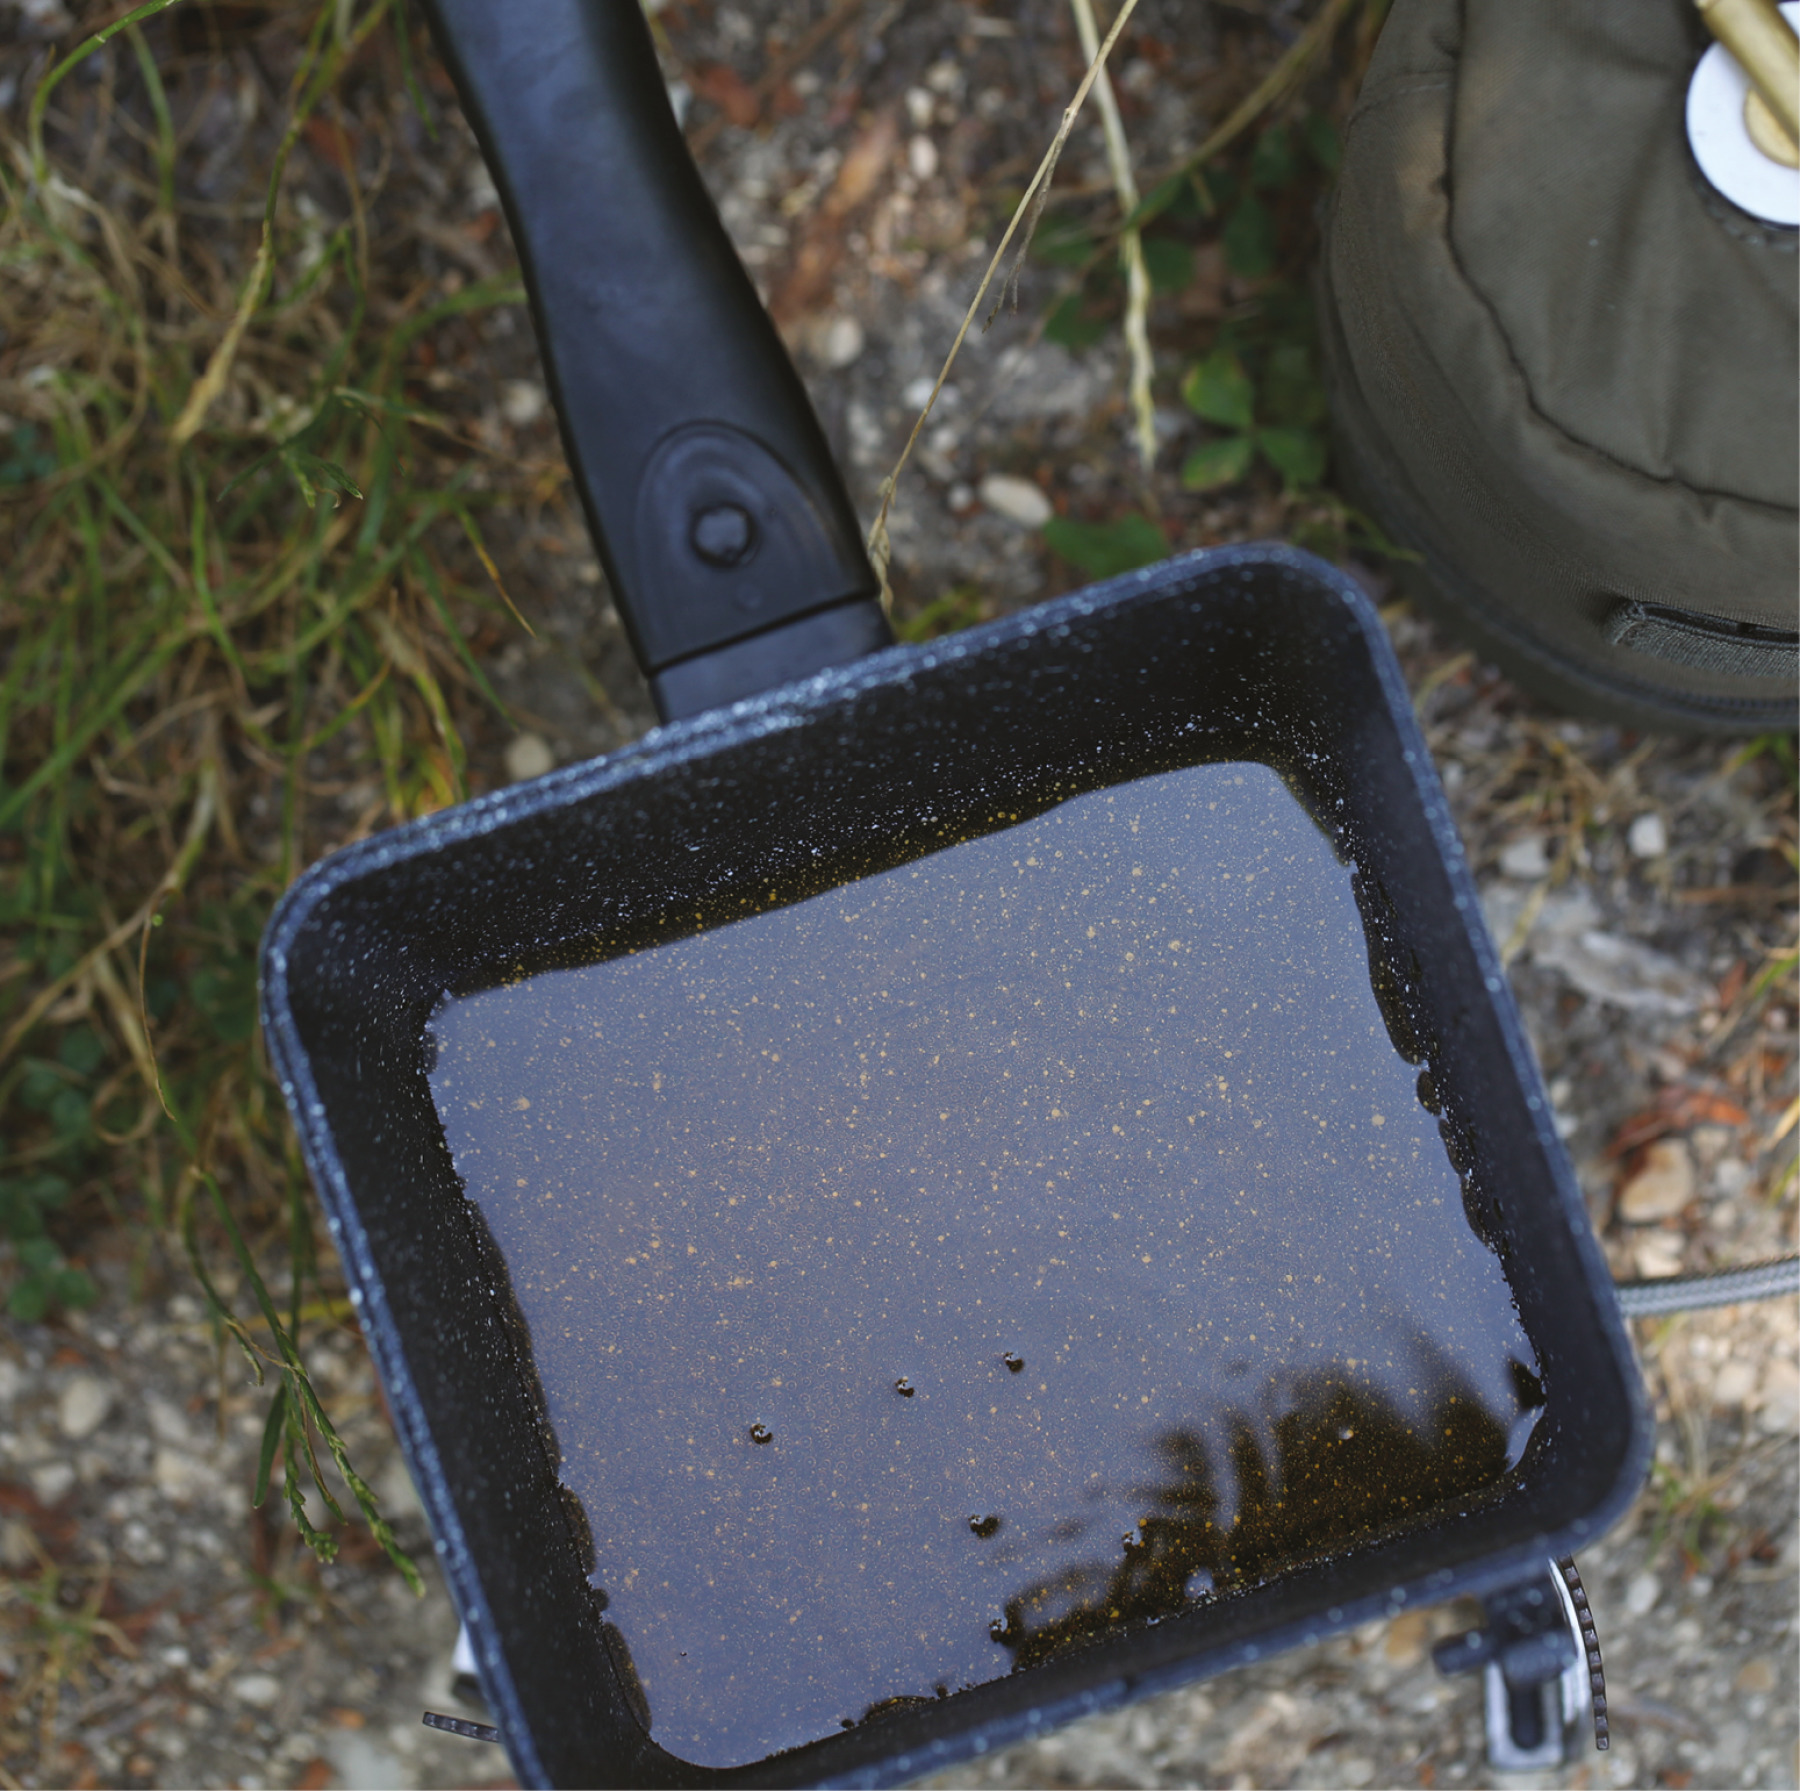 2. Once heated, pour directly over your boilies.